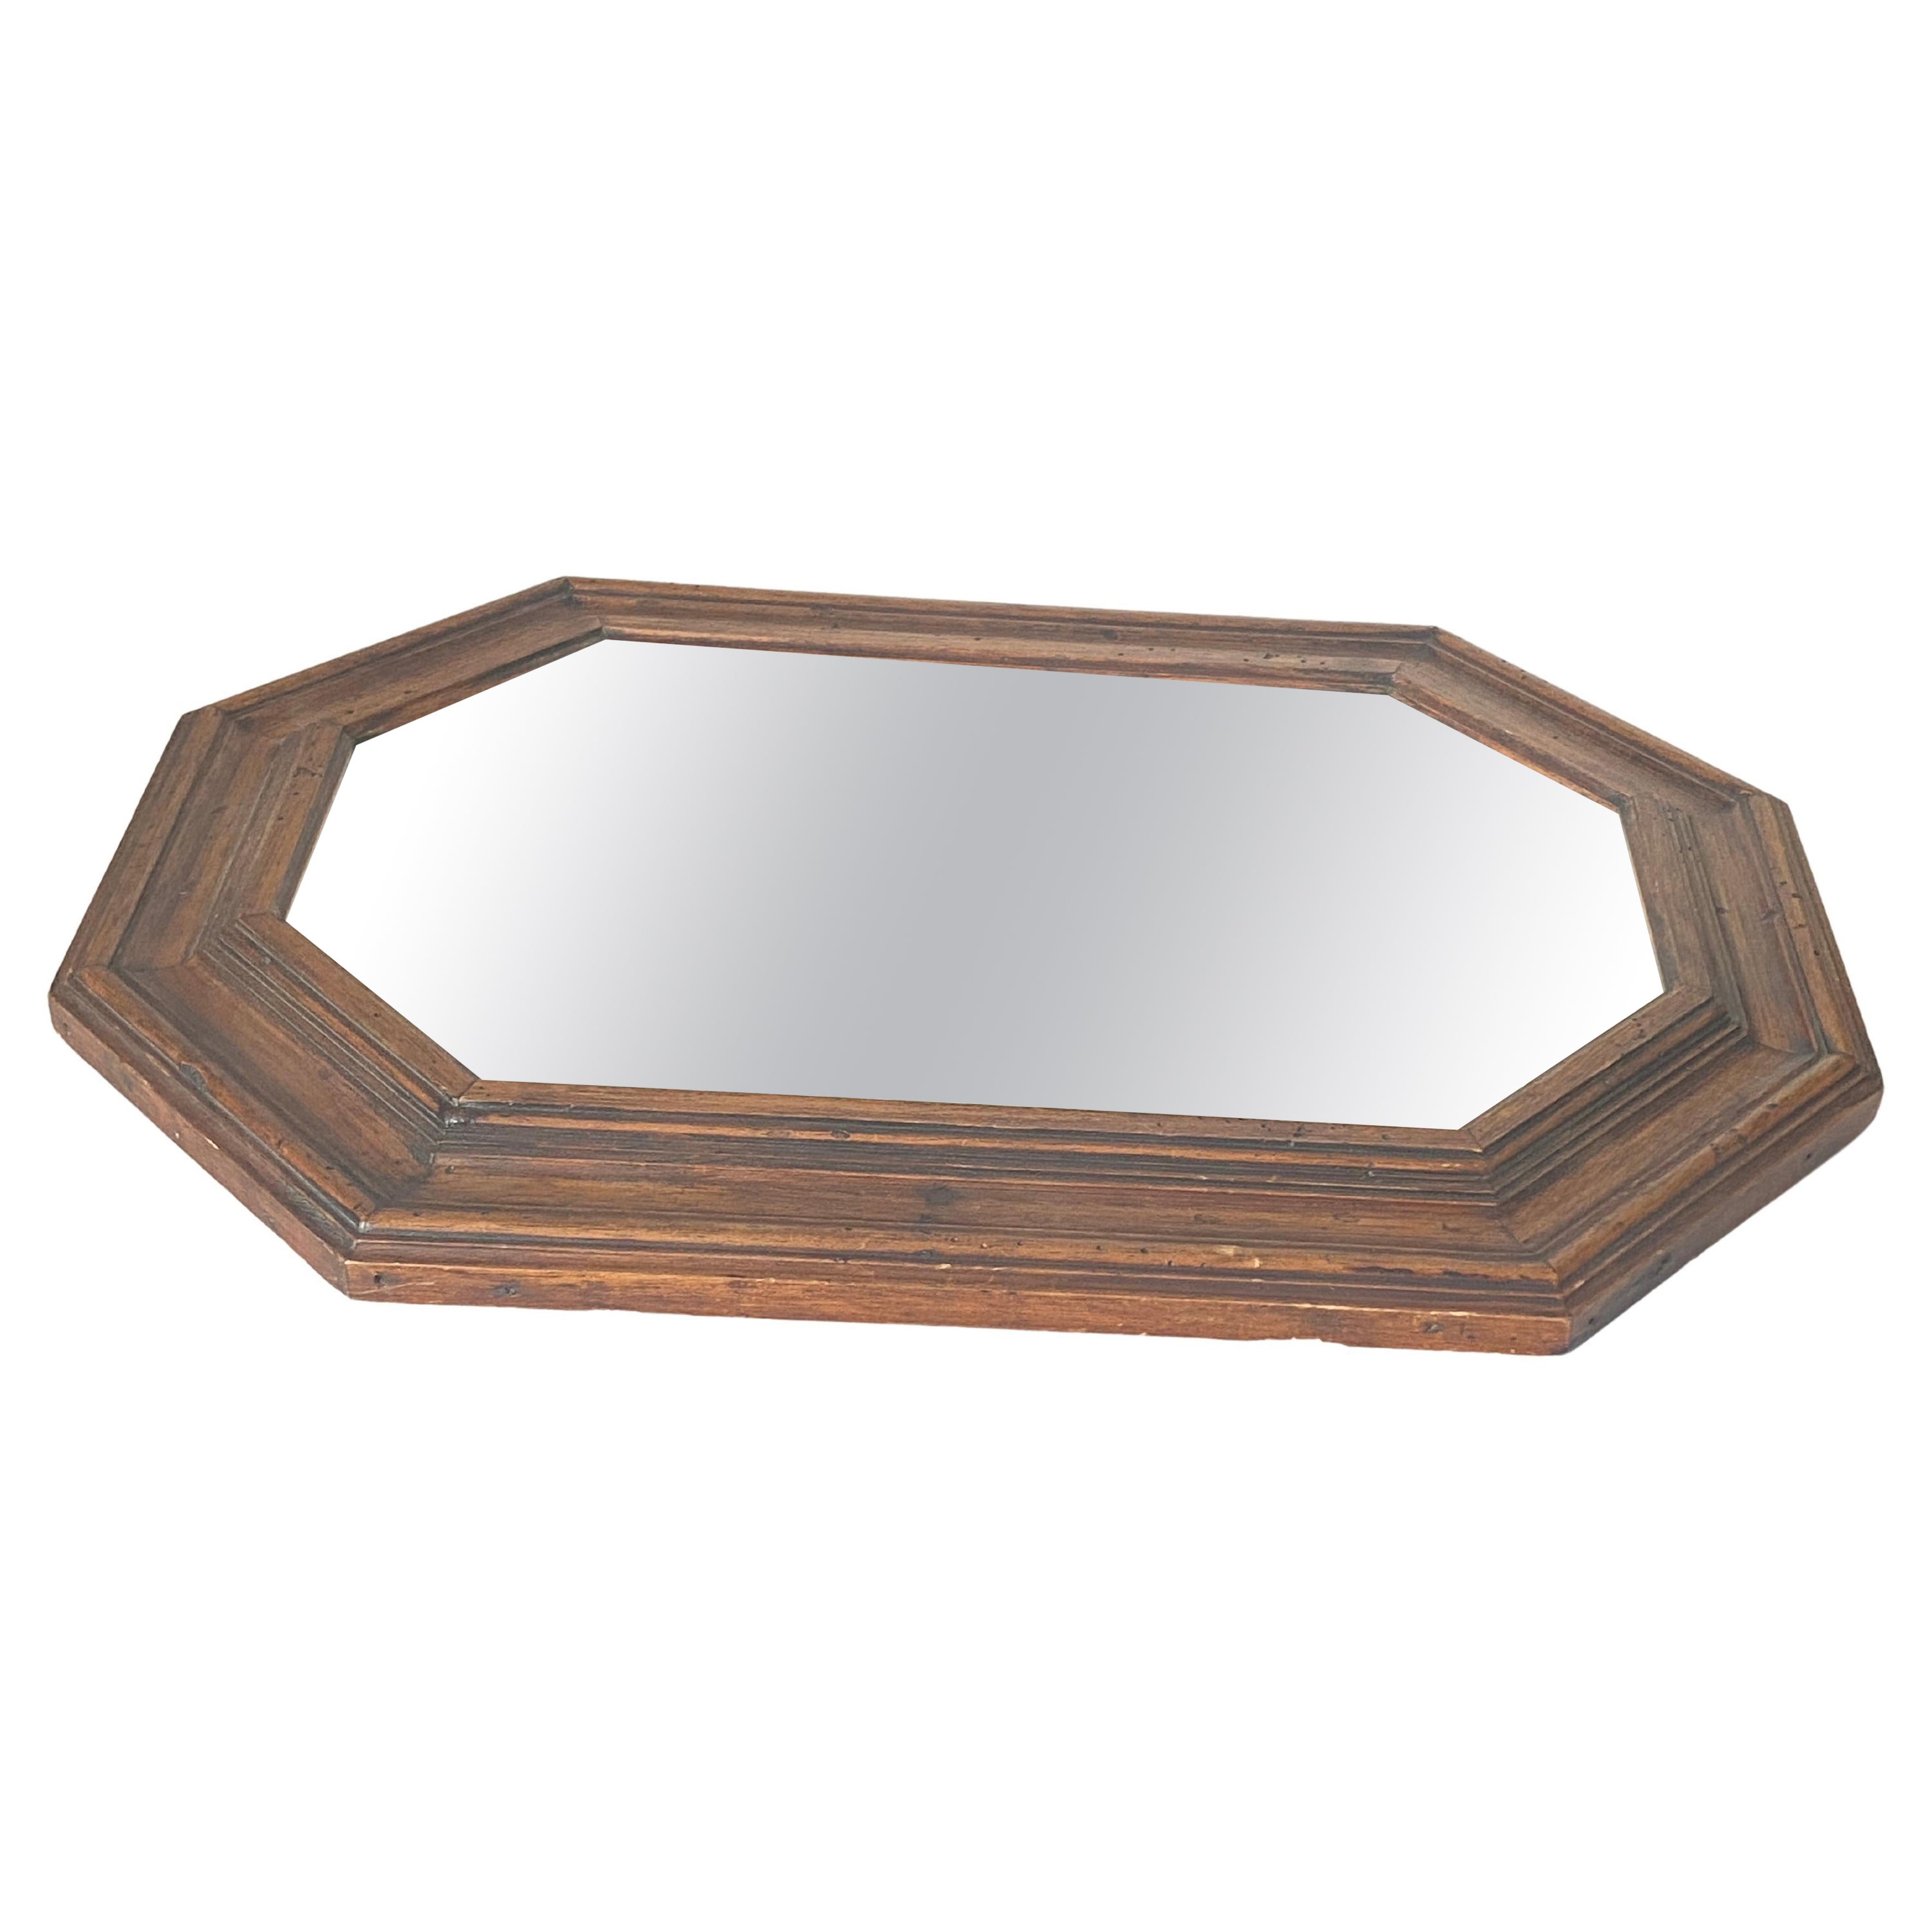 Classical Oak Wood Frame Mirror Brown Color Beautiful Patina Color, England 1940 For Sale